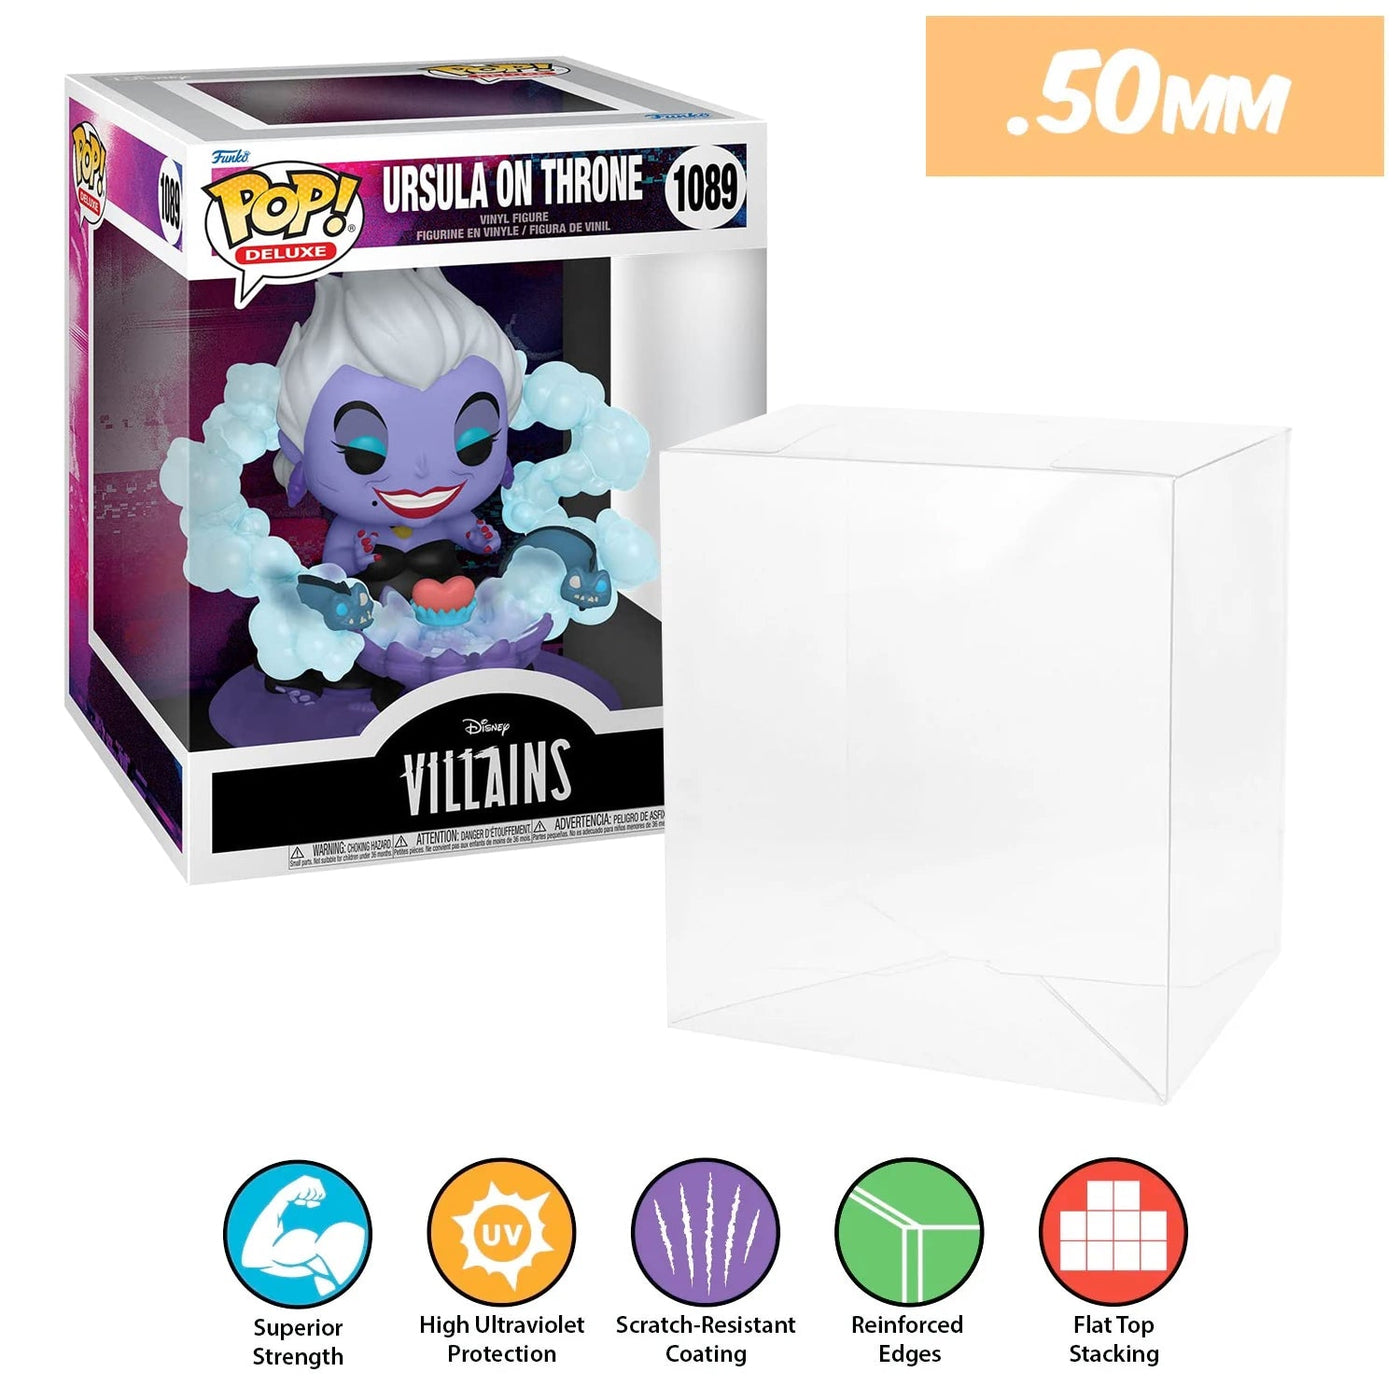 disney ursula on throne pop deluxe best funko pop protectors thick strong uv scratch flat top stack vinyl display geek plastic shield vaulted eco armor fits collect protect display case kollector protector